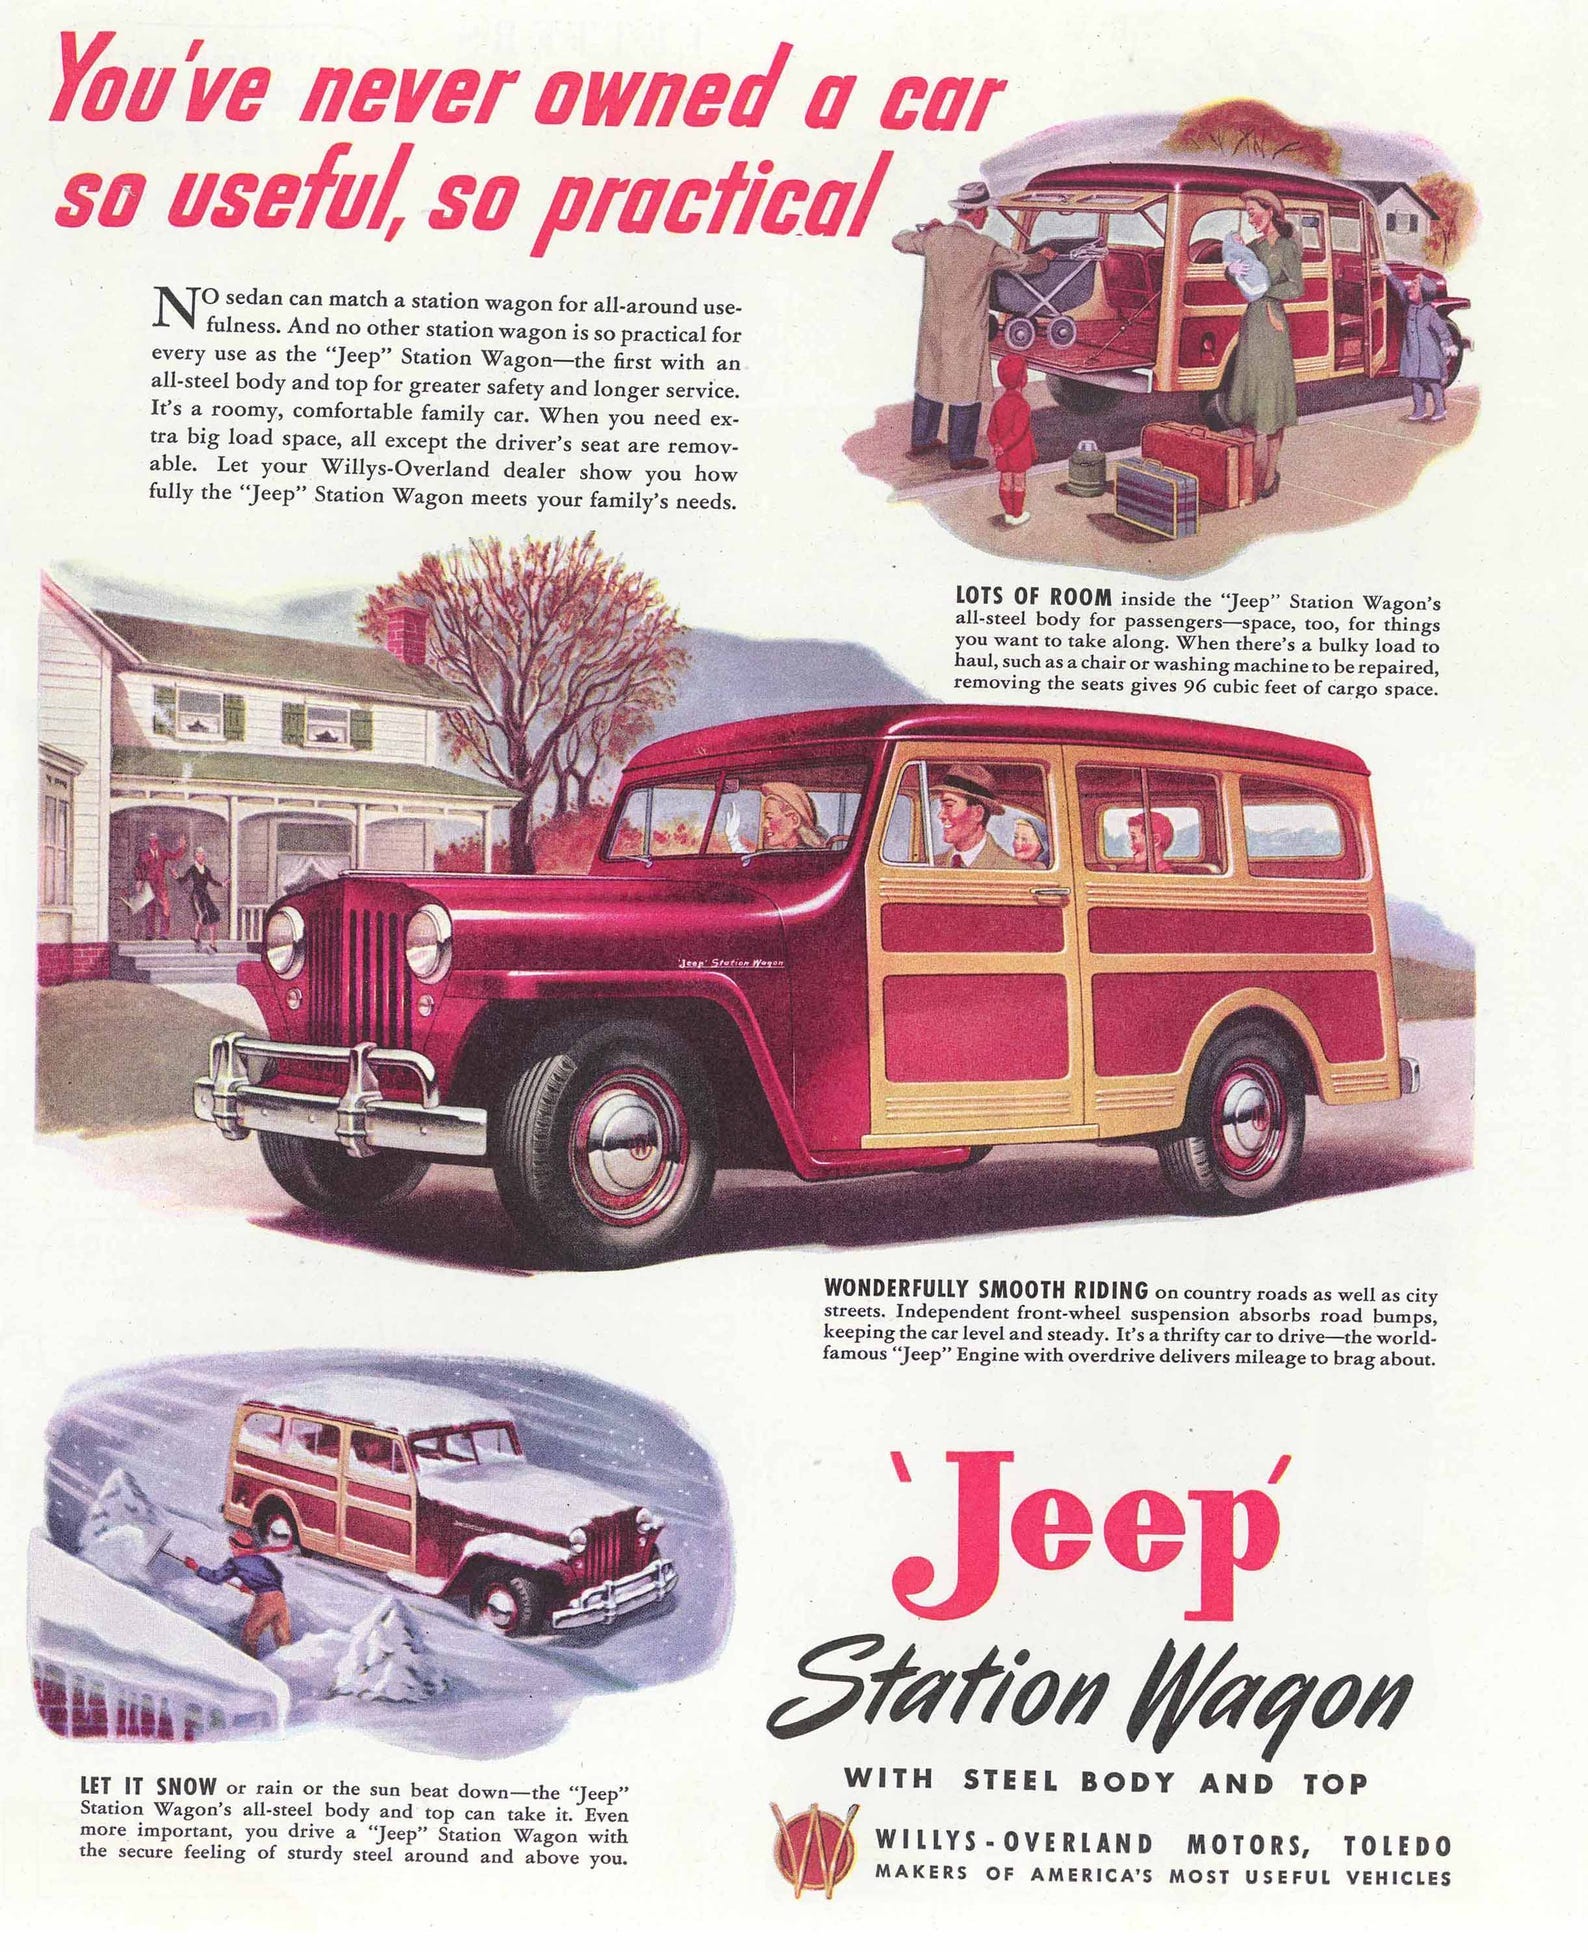 After the war, a station wagon version of the Jeep was marketed stateside. "You've never owned a car so useful, so practical," said this 1947 ad.